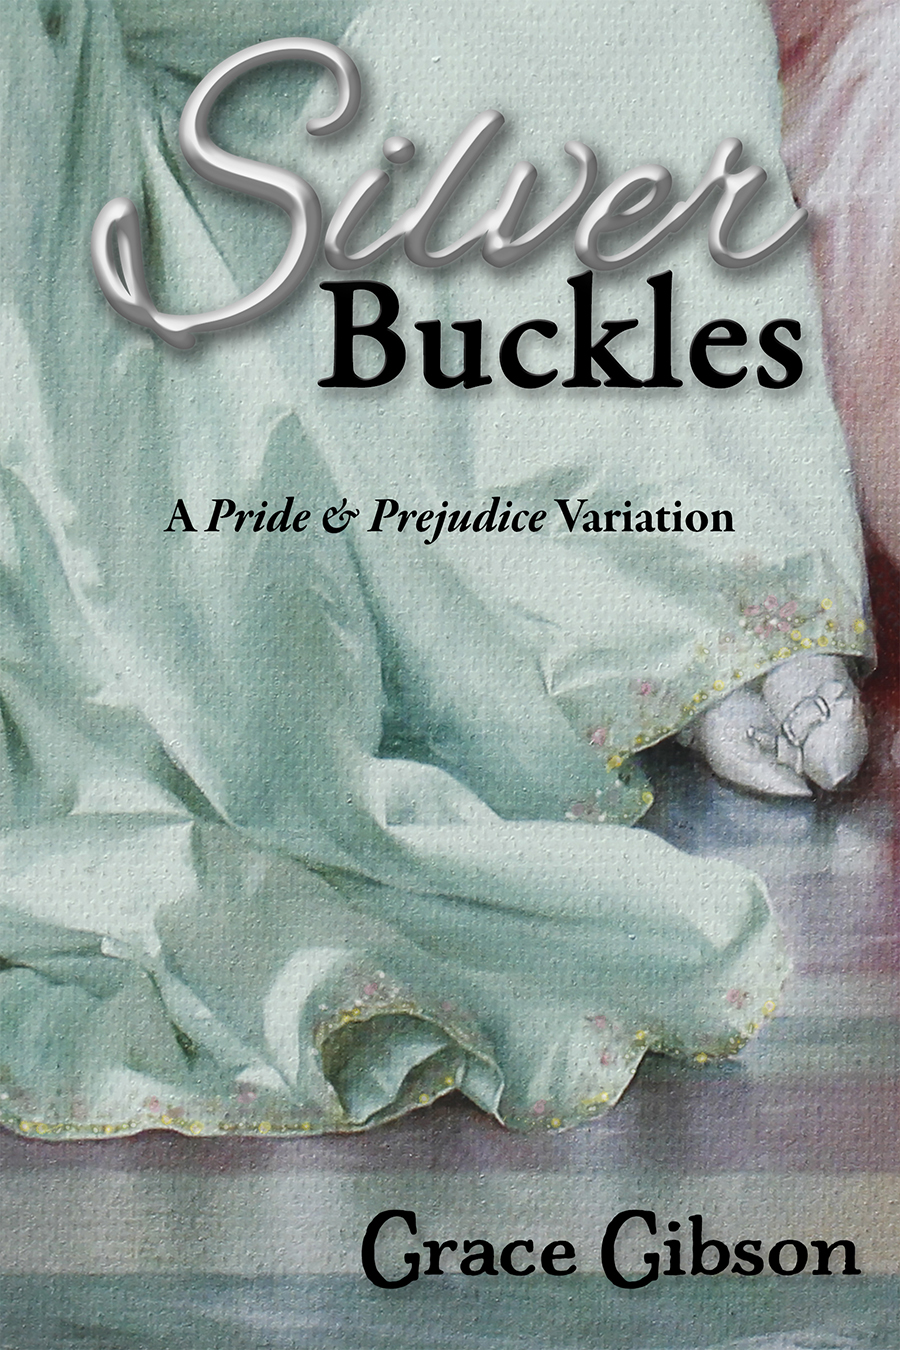 “Silver Buckles” by Grace Gibson, guest post + giveaway